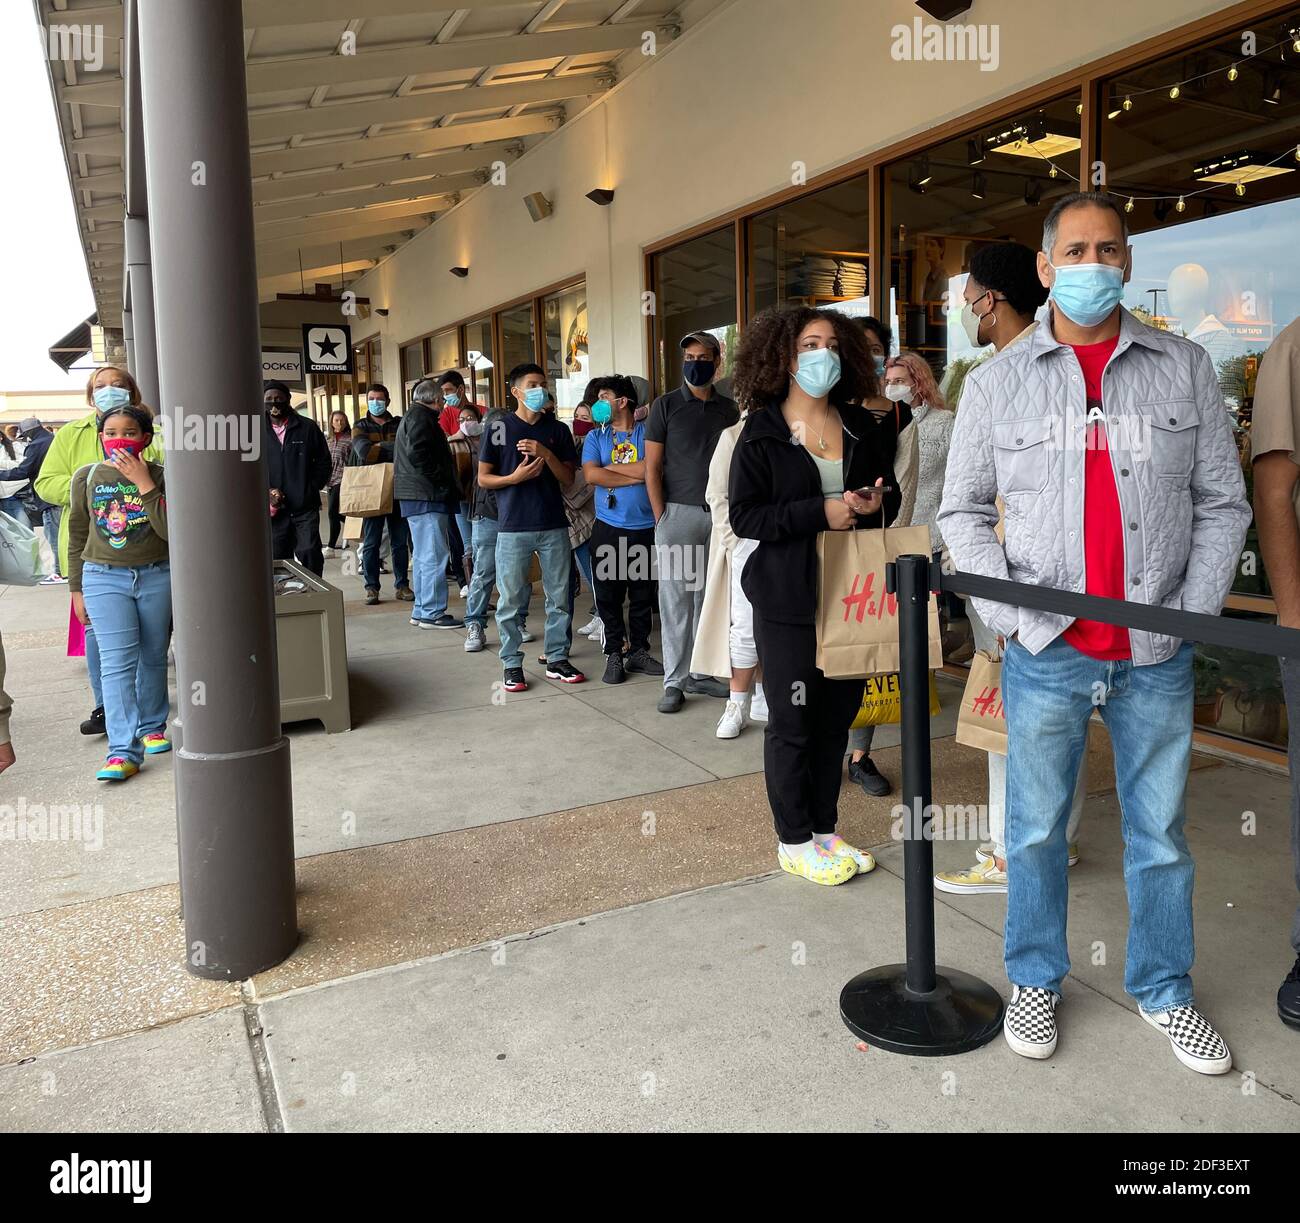 Allen, TX / USA - November 27, 2020: Close up view of people wearing the mask and lining up in front of the store at the Allen Premium Outlets on Blac Stock Photo